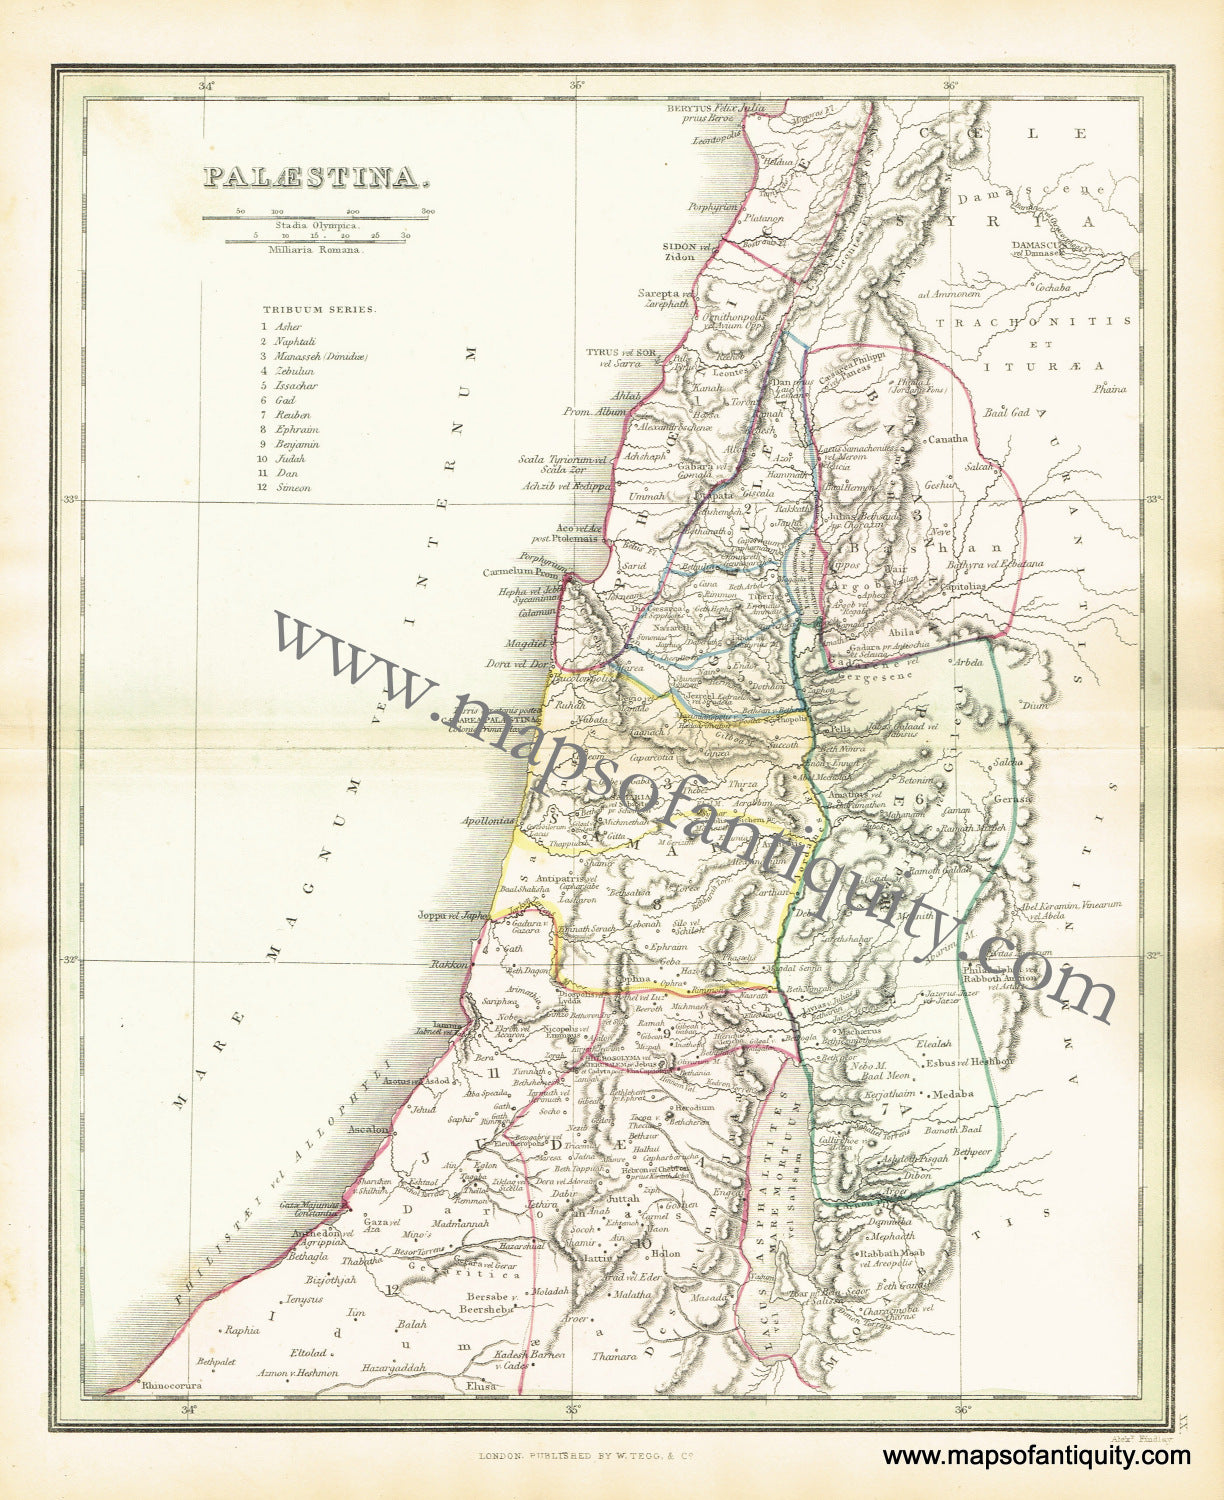 Antique-Hand-Colored-Map-Palaestina-******-Middle-East-&-Holy-Land--1854-Findlay-Maps-Of-Antiquity